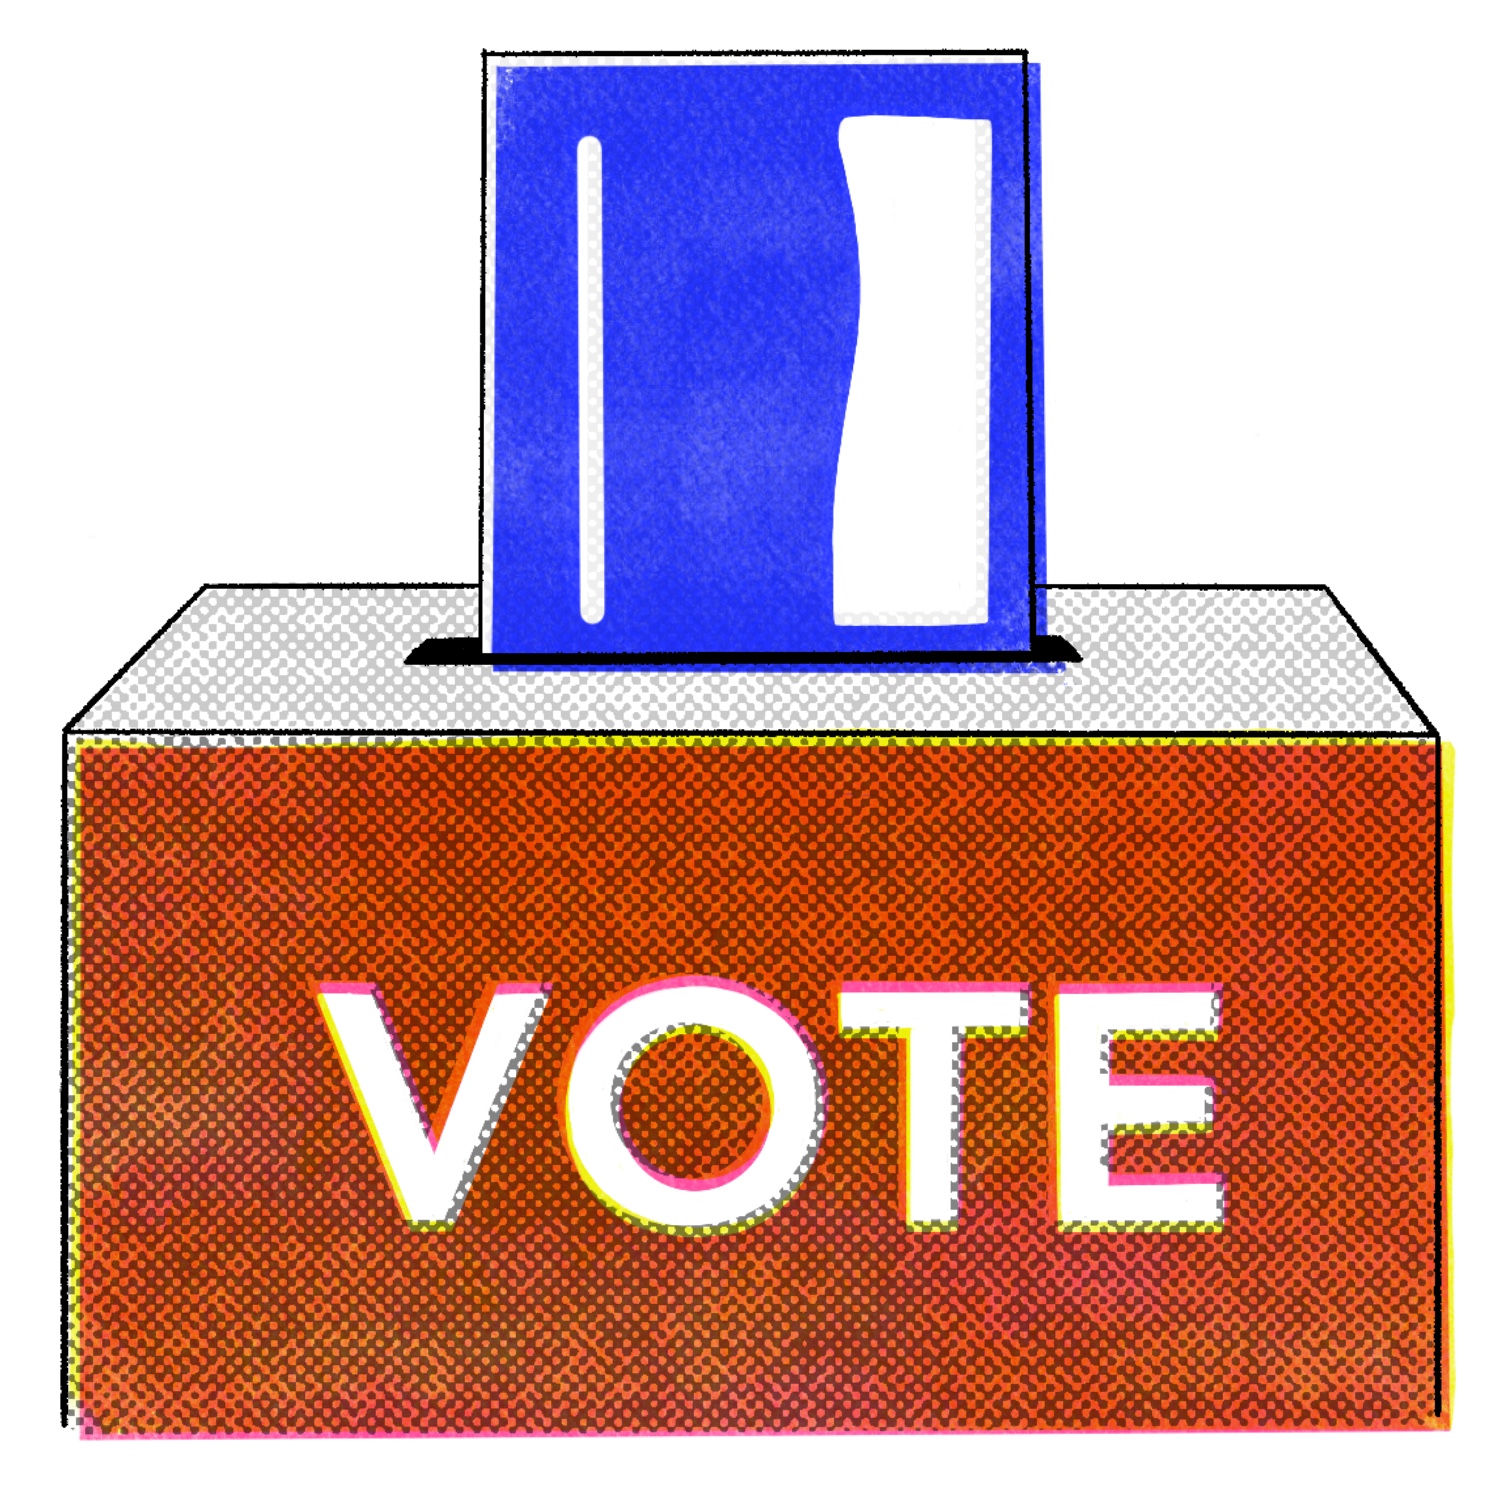 illustration of a blue ballot going into a red box with the word VOTE printed in white on it.